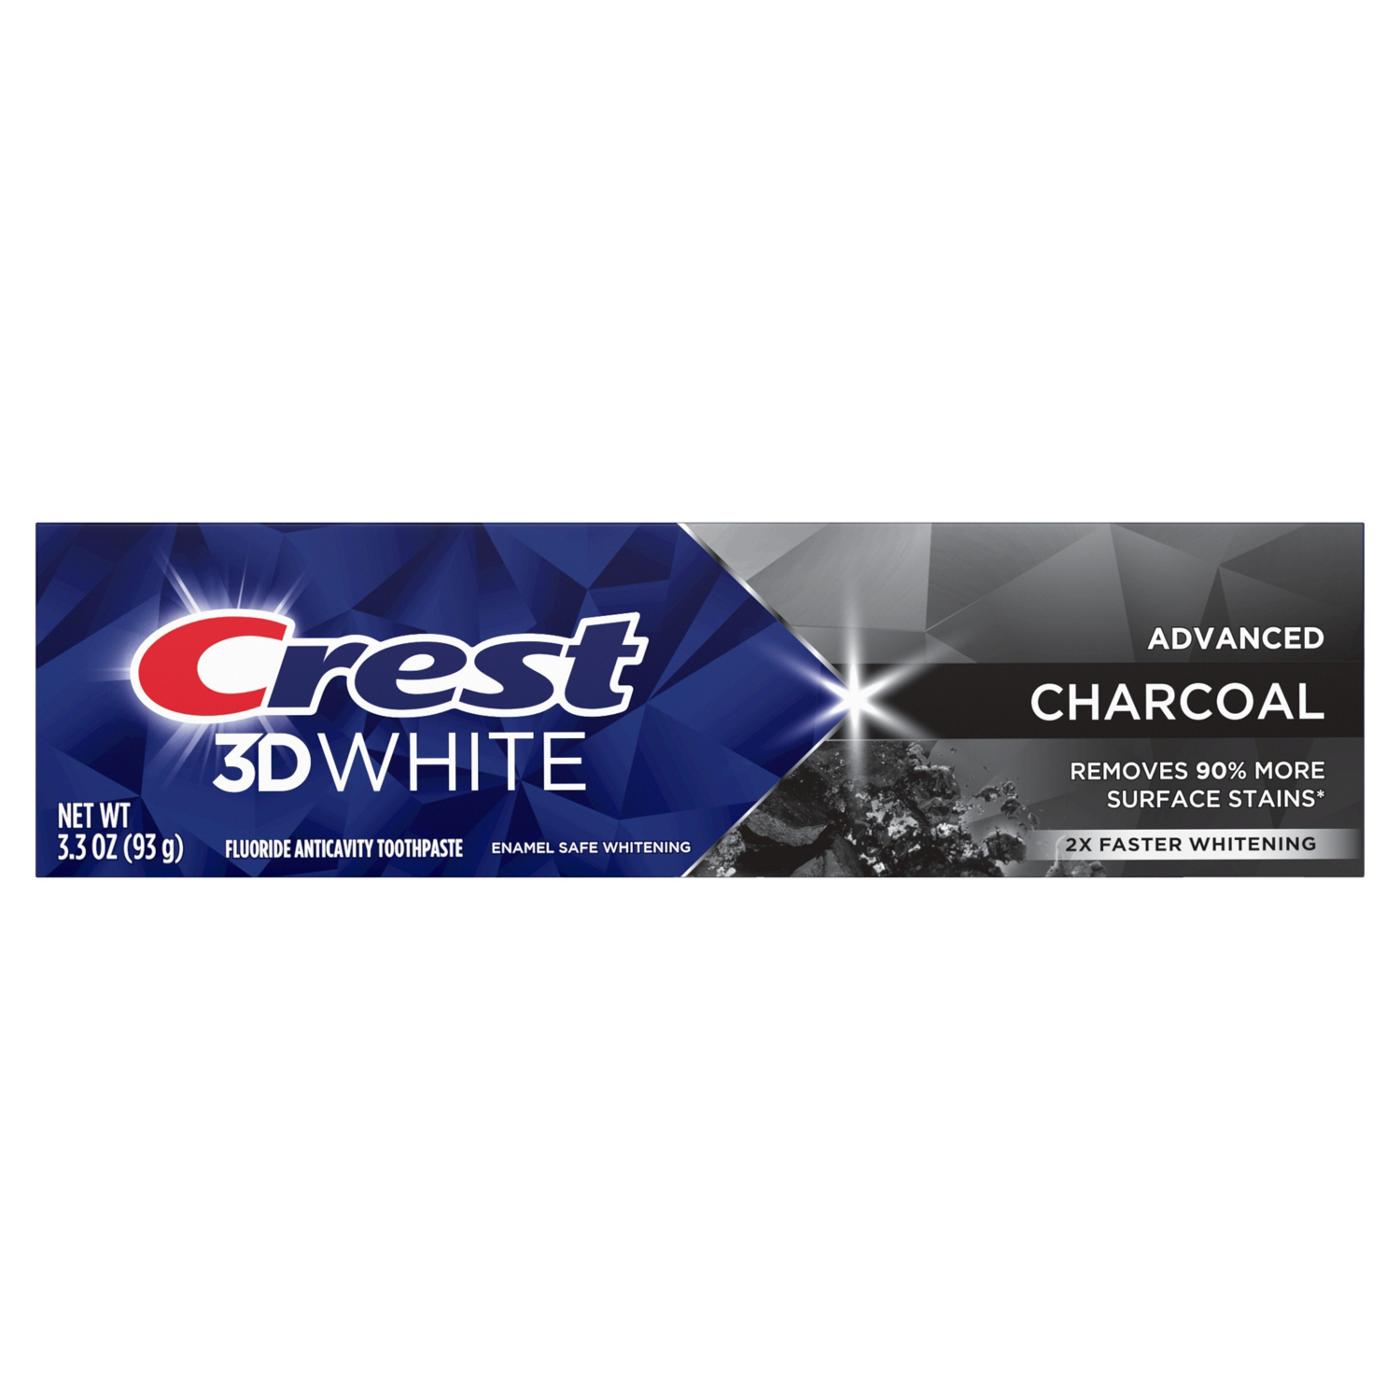 Crest 3D White Whitening Toothpaste - Charcoal; image 1 of 7